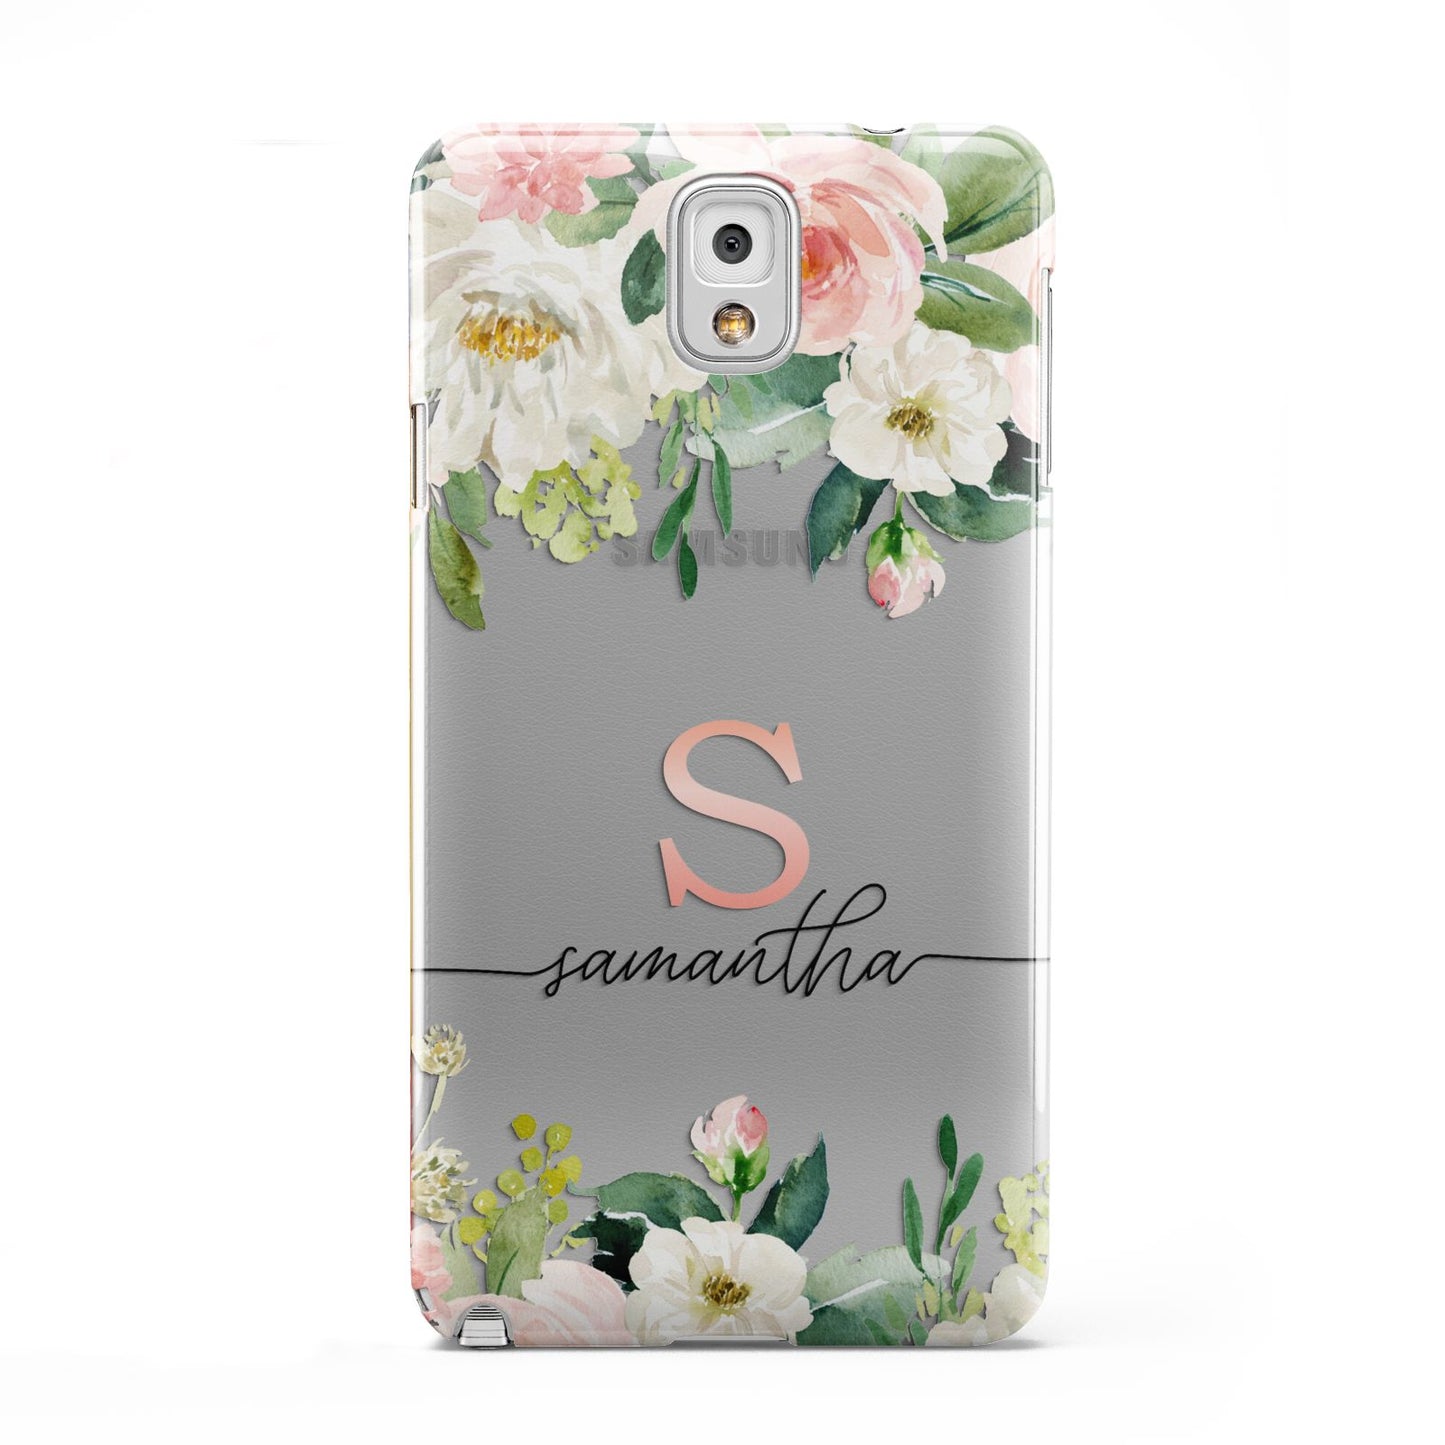 Monogrammed Floral Roses Samsung Galaxy Note 3 Case